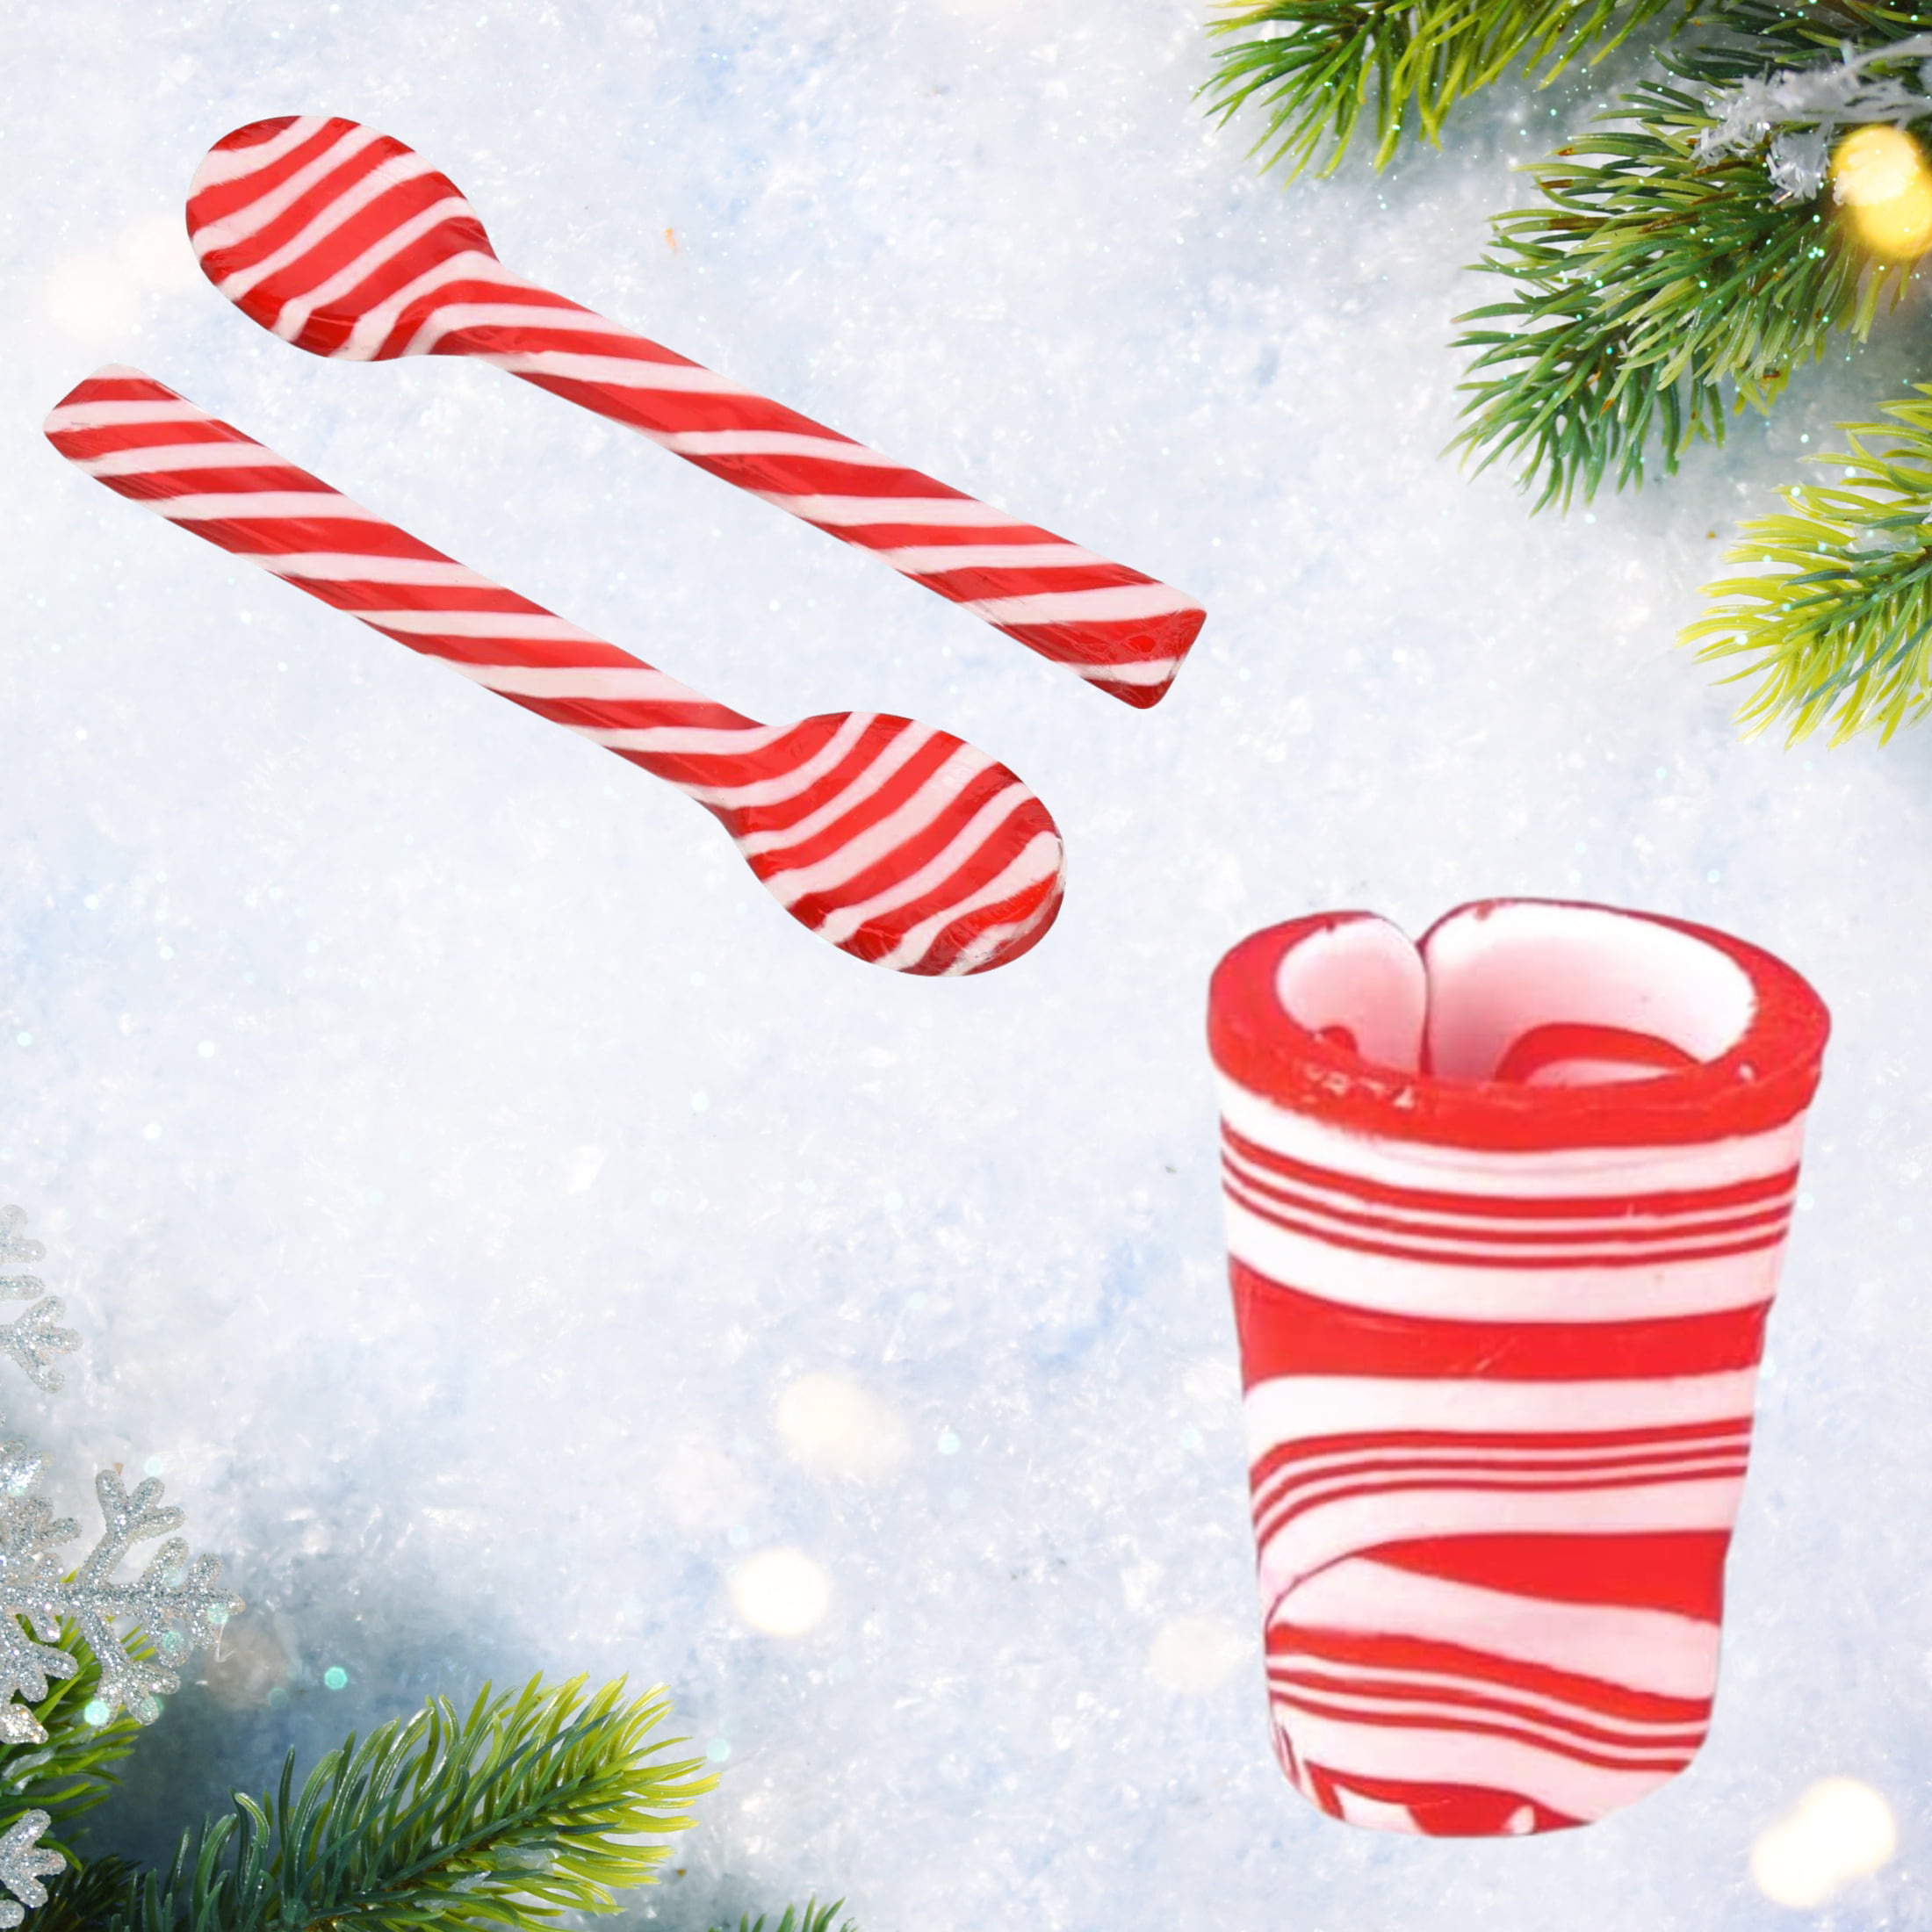 Peppermint Candy Cups  Peppermint Candy Shot Glasses